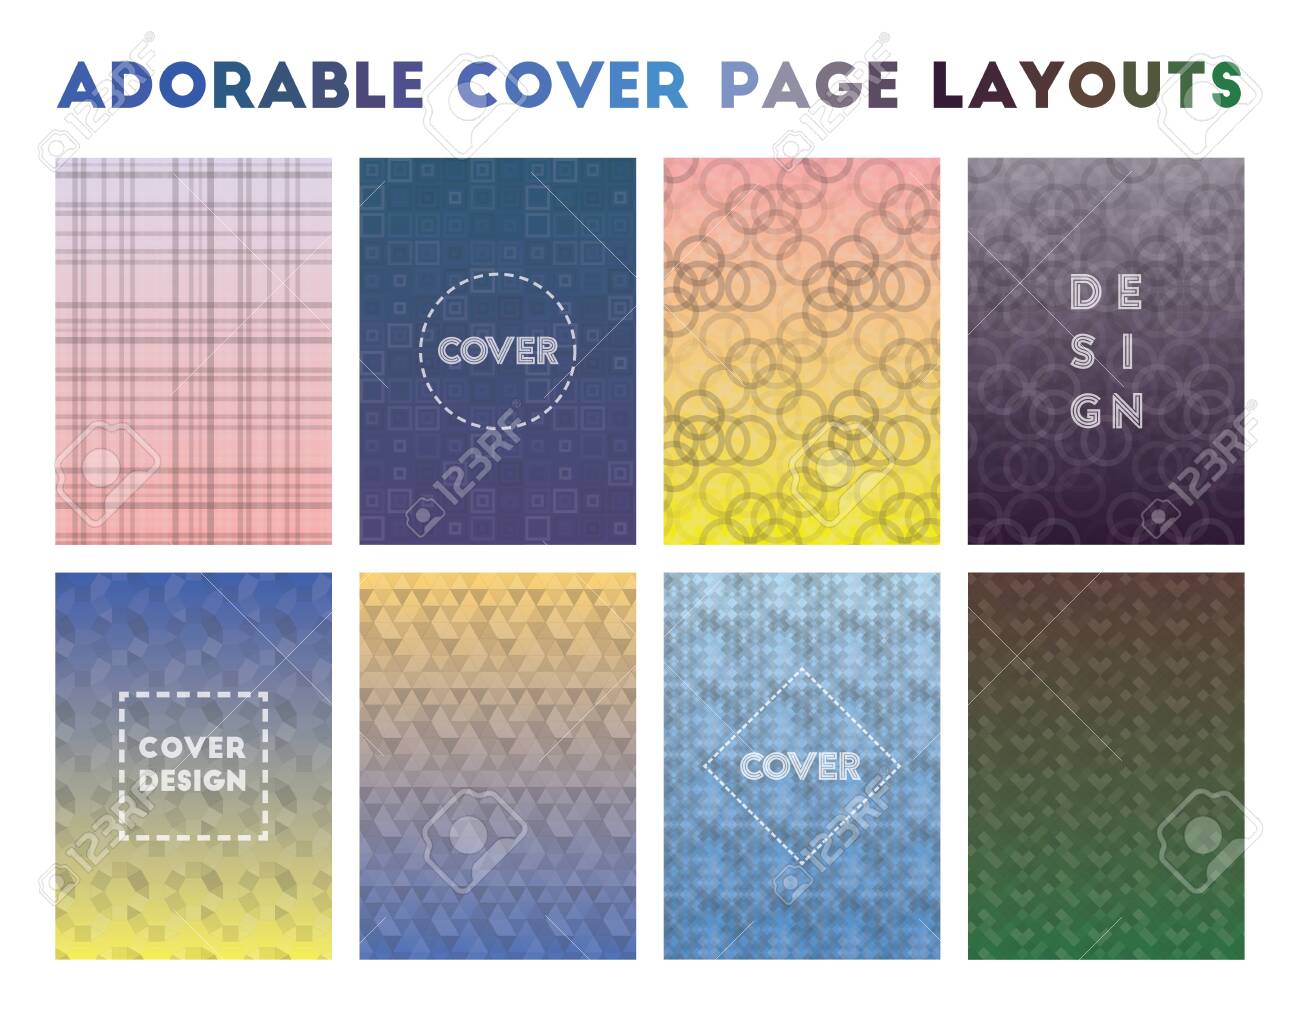 Adorable Cover Layouts Geometric Patterns